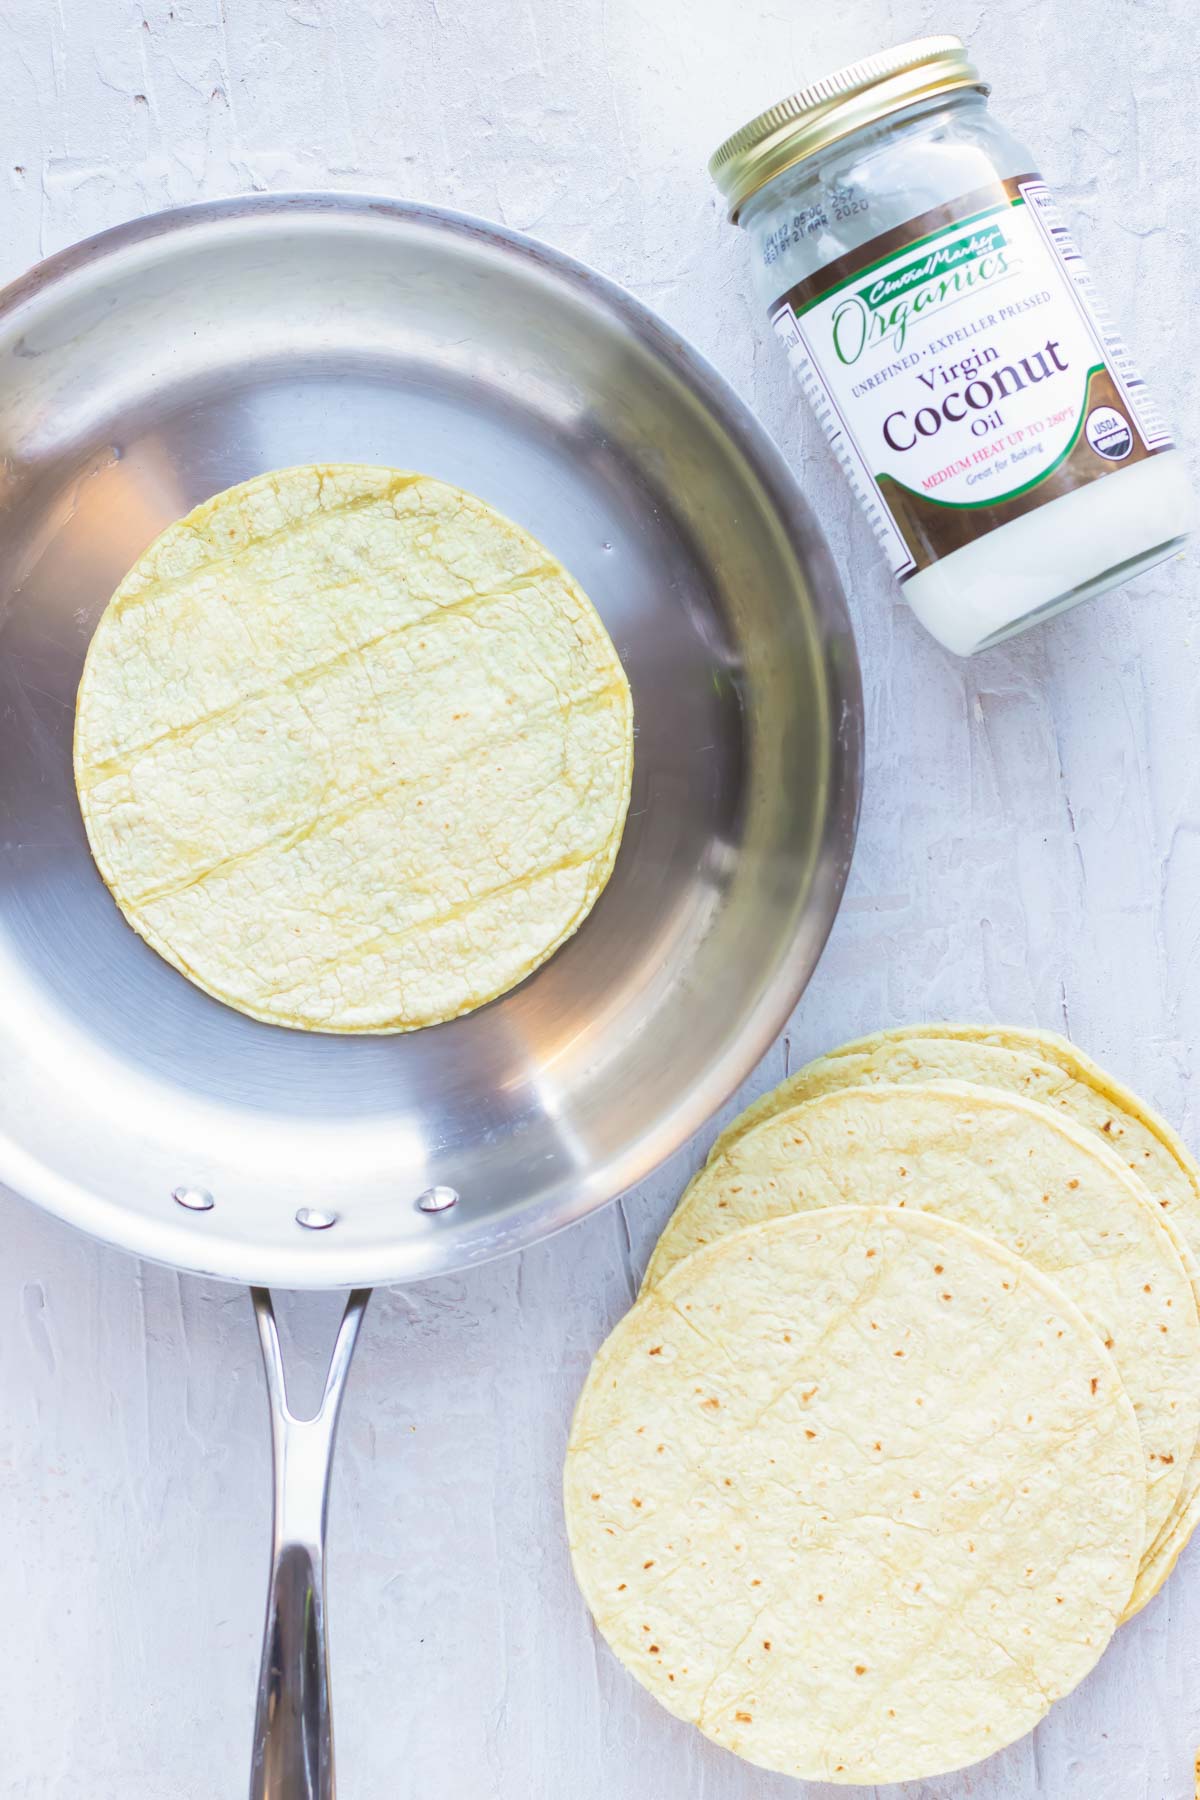 A corn tortilla being heated up with coconut oil in a skillet.